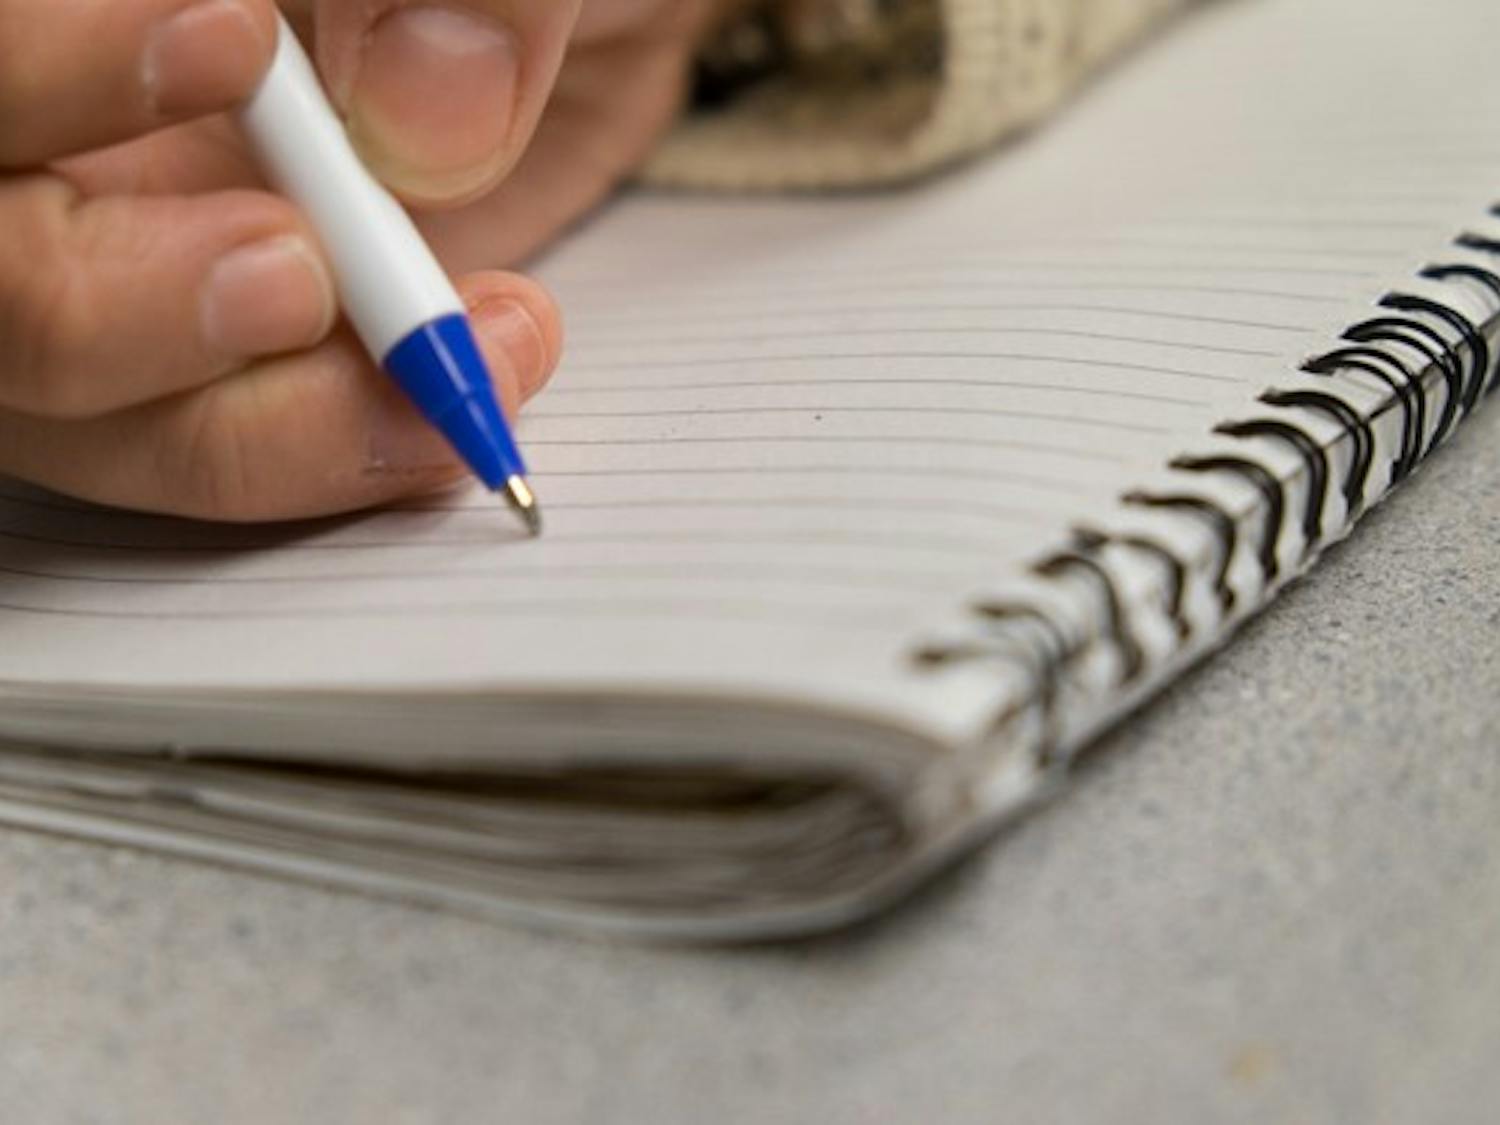 Numerous ASU professors are encouraging students to take handwritten notes in lieu of electronic notes. A study showed that students who write notes by hand do better on exams. (Photo illustration by Andrew Ybanez)